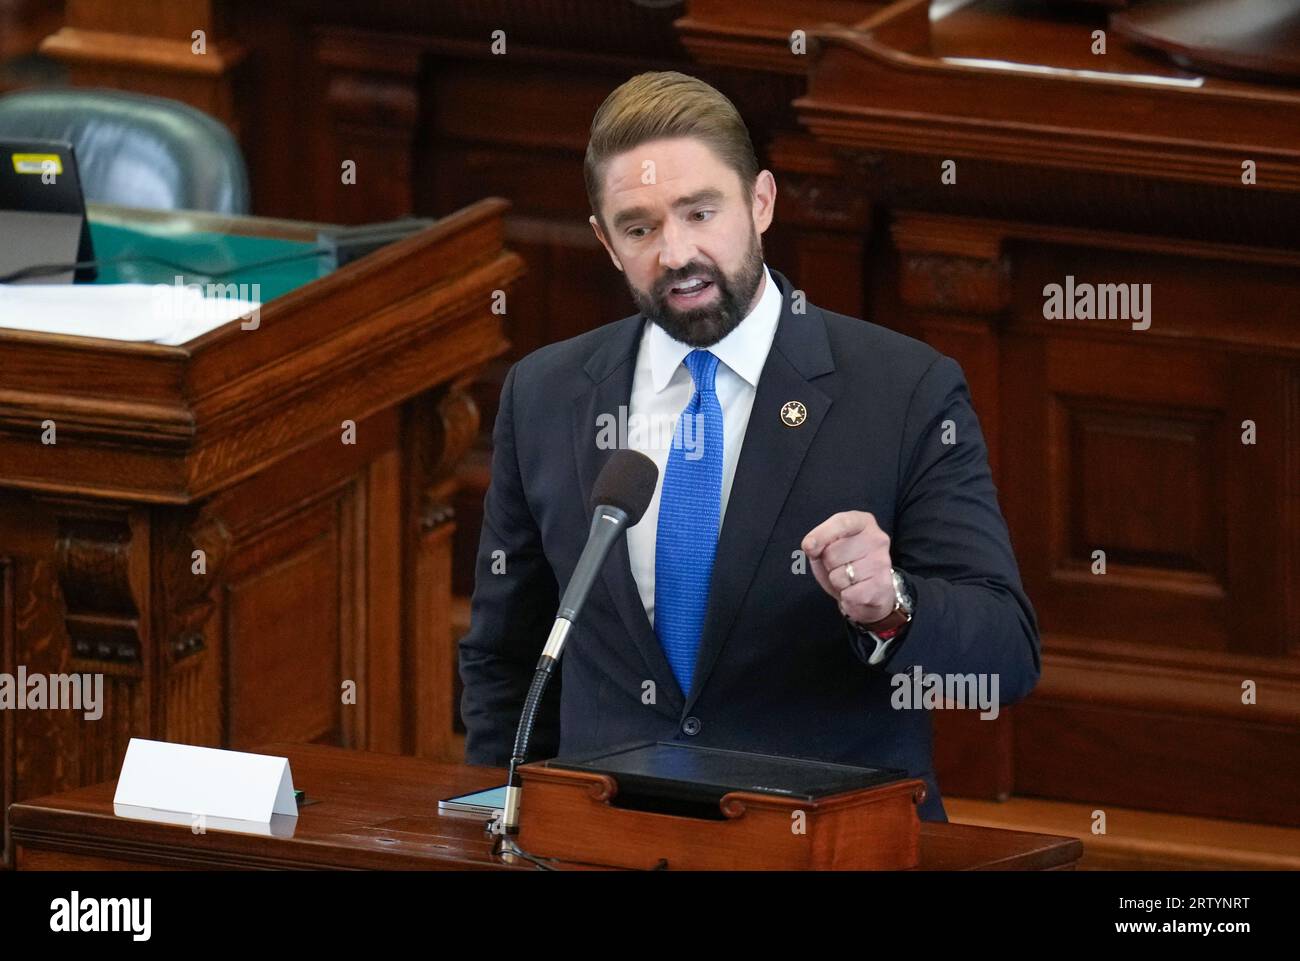 State Rep. JEFF LEACH, R-Allen, makes an impassioned speech for the prosecution during final arguments in Texas Attorney General Ken Paxton's impeachment trial in the Texas Senate on September 15, 2023. The jury is deliberating the charges late Friday afternoon. Credit: Bob Daemmrich/Alamy Live News Stock Photo